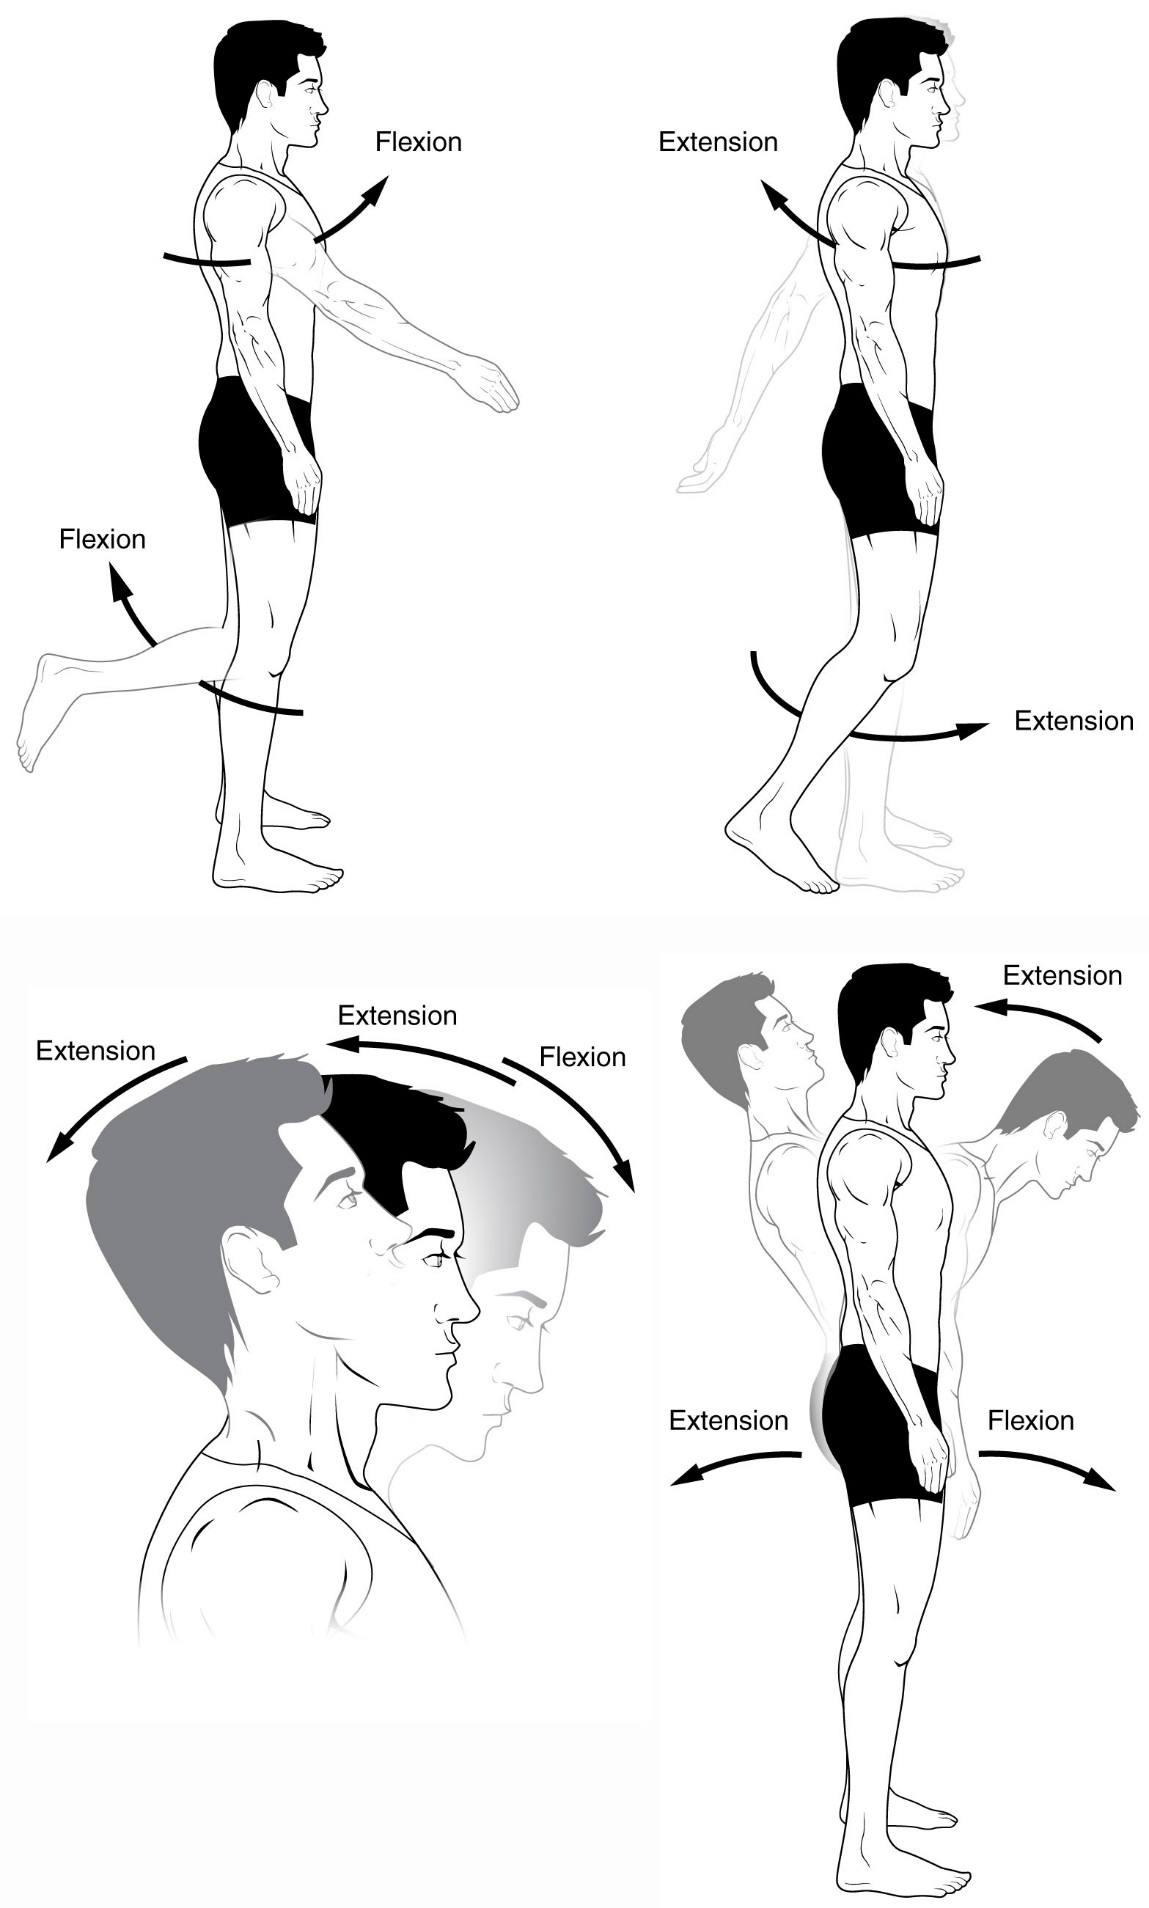 File:Flexion and extension.jpg - Wikimedia Commons